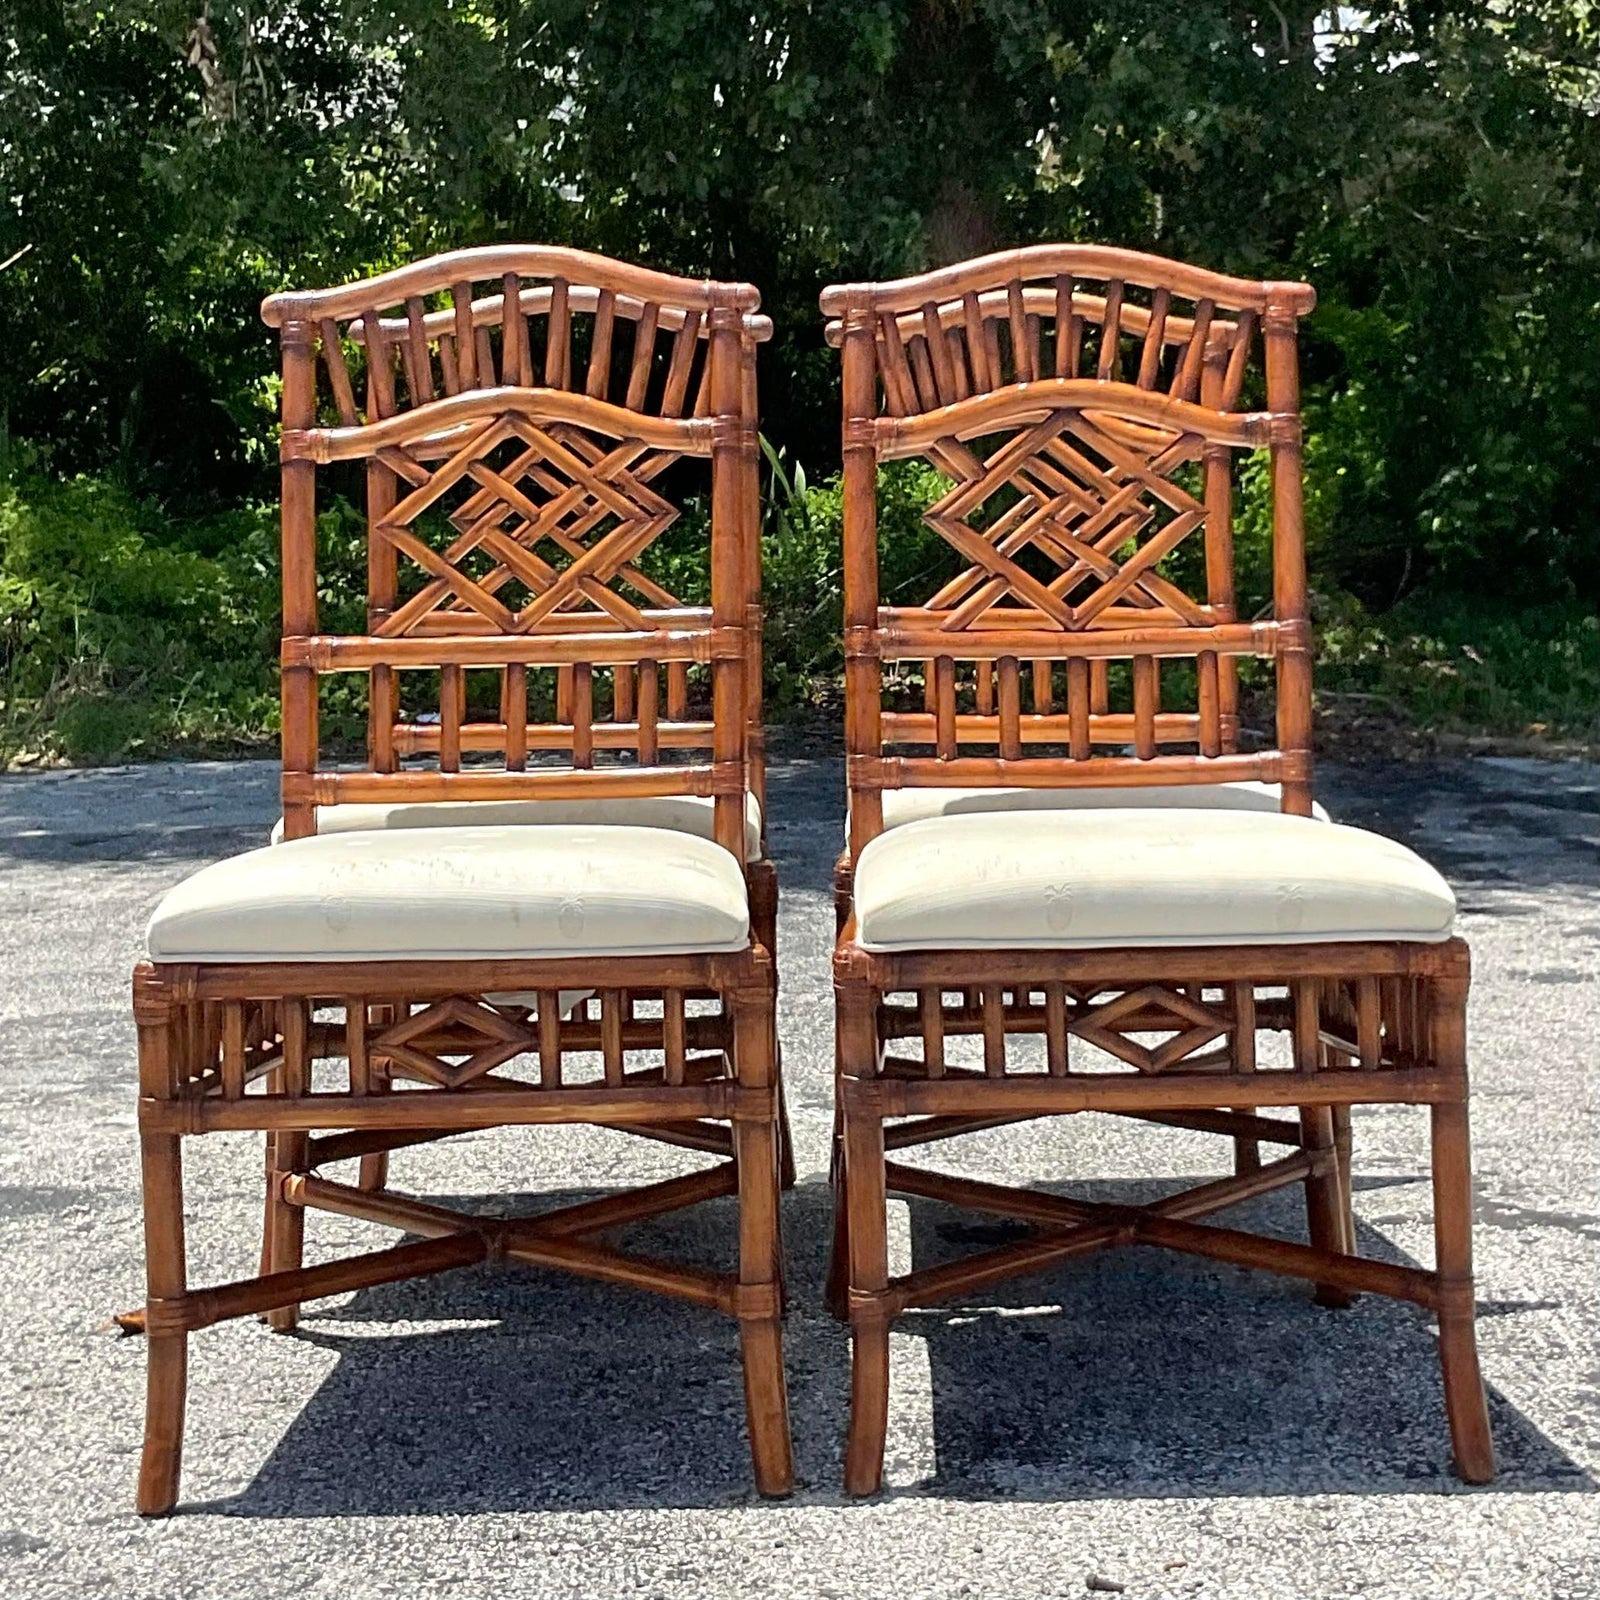 A fabulous set of four vintage Coastal dining chairs. Made by the iconic Lexington group. Beautiful hand carved bamboo detail. The seats must be recovered, but they are in great shape. Acquired from a Palm Beach estate.

The chairs are in great